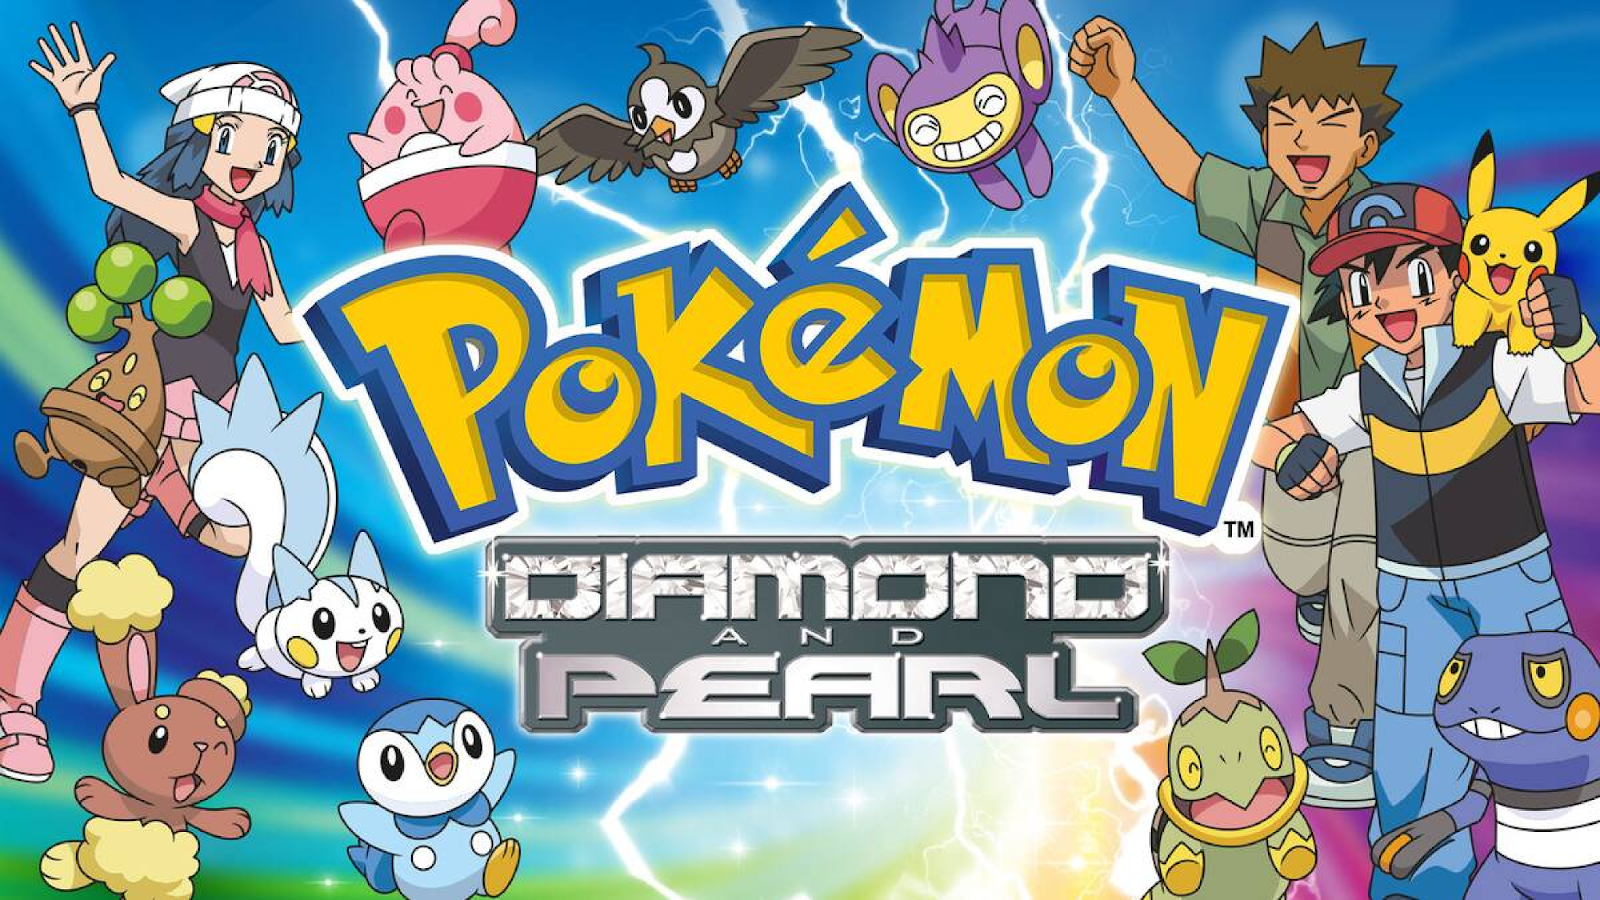 Diamond and pearl introduced many changes to pokemon&